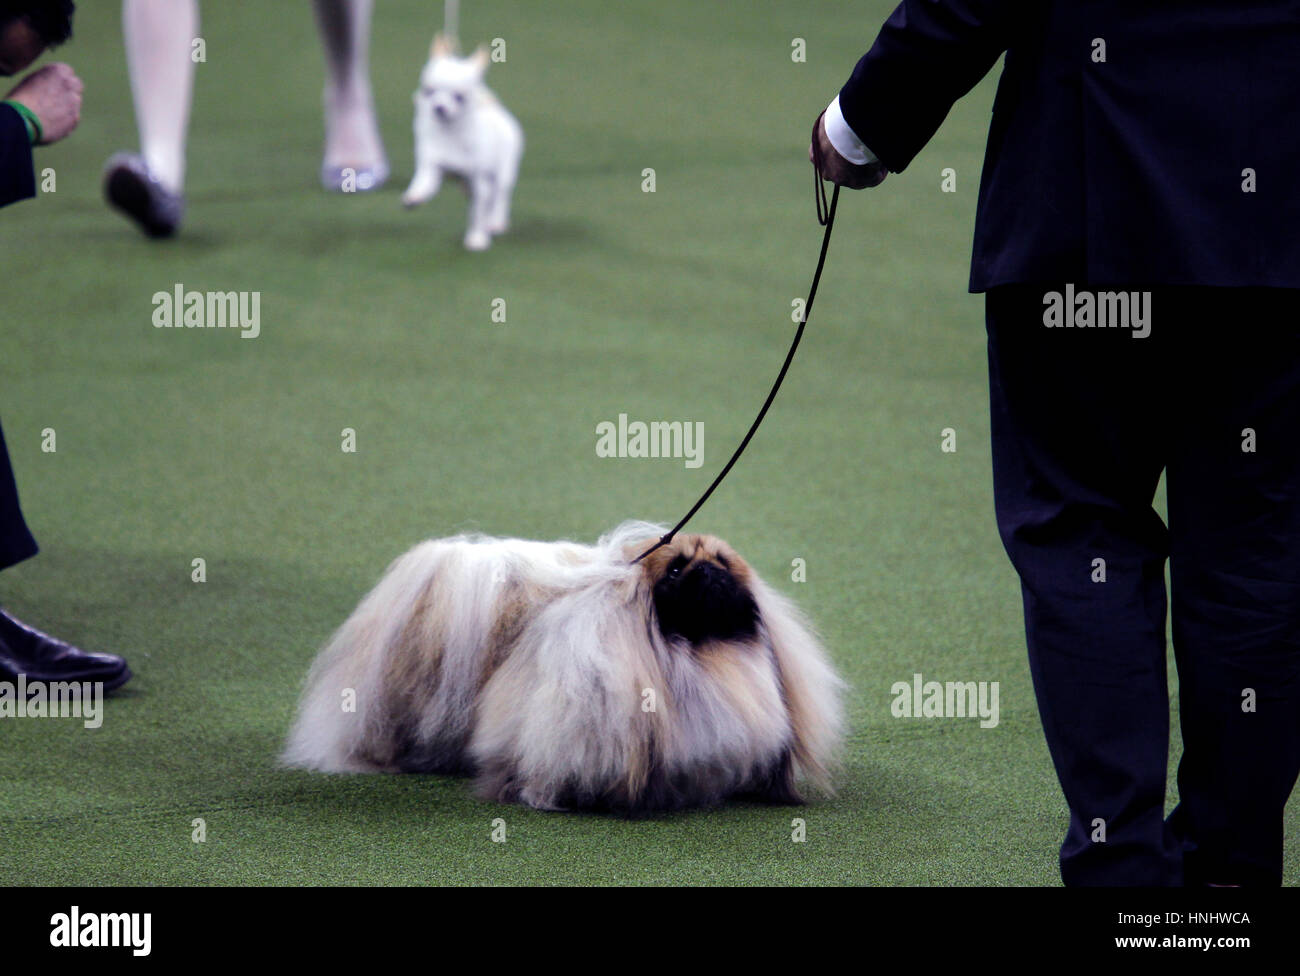 New York City, 13th February 2017. 'Chuckie' a Pekingese who won the Toy Division at the 141st Annual Westminster Dog Show at Madison Square Garden in New York City on February 13th, 2017. Credit: Adam Stoltman/Alamy Live News Stock Photo